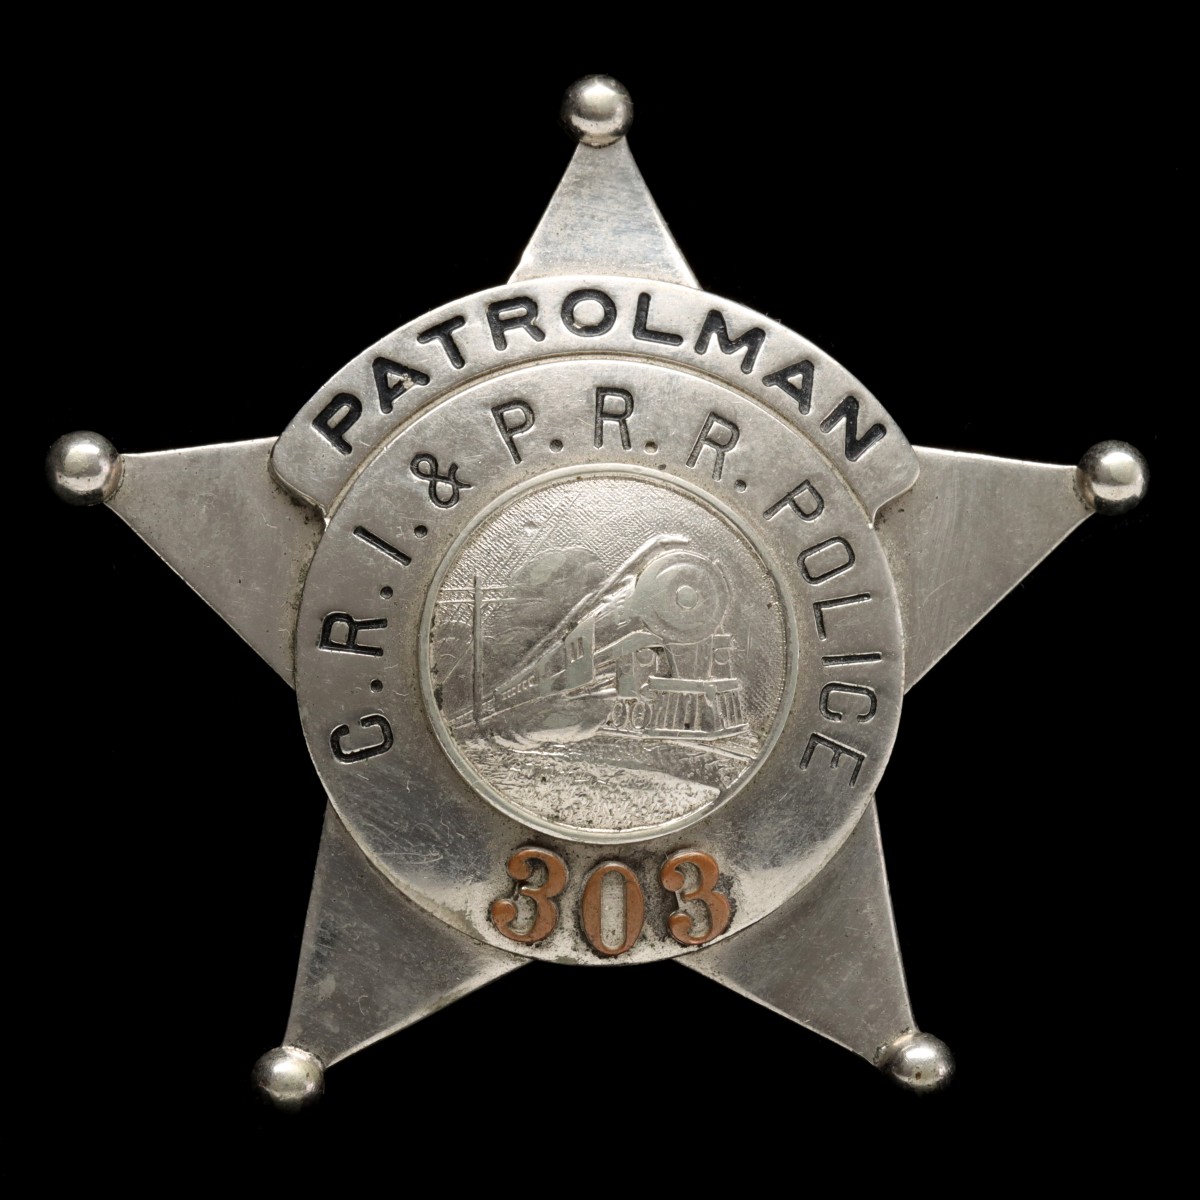 A FIVE POINT BALL-TIP ROCK ISLAND RAILROAD POLICE BADGE